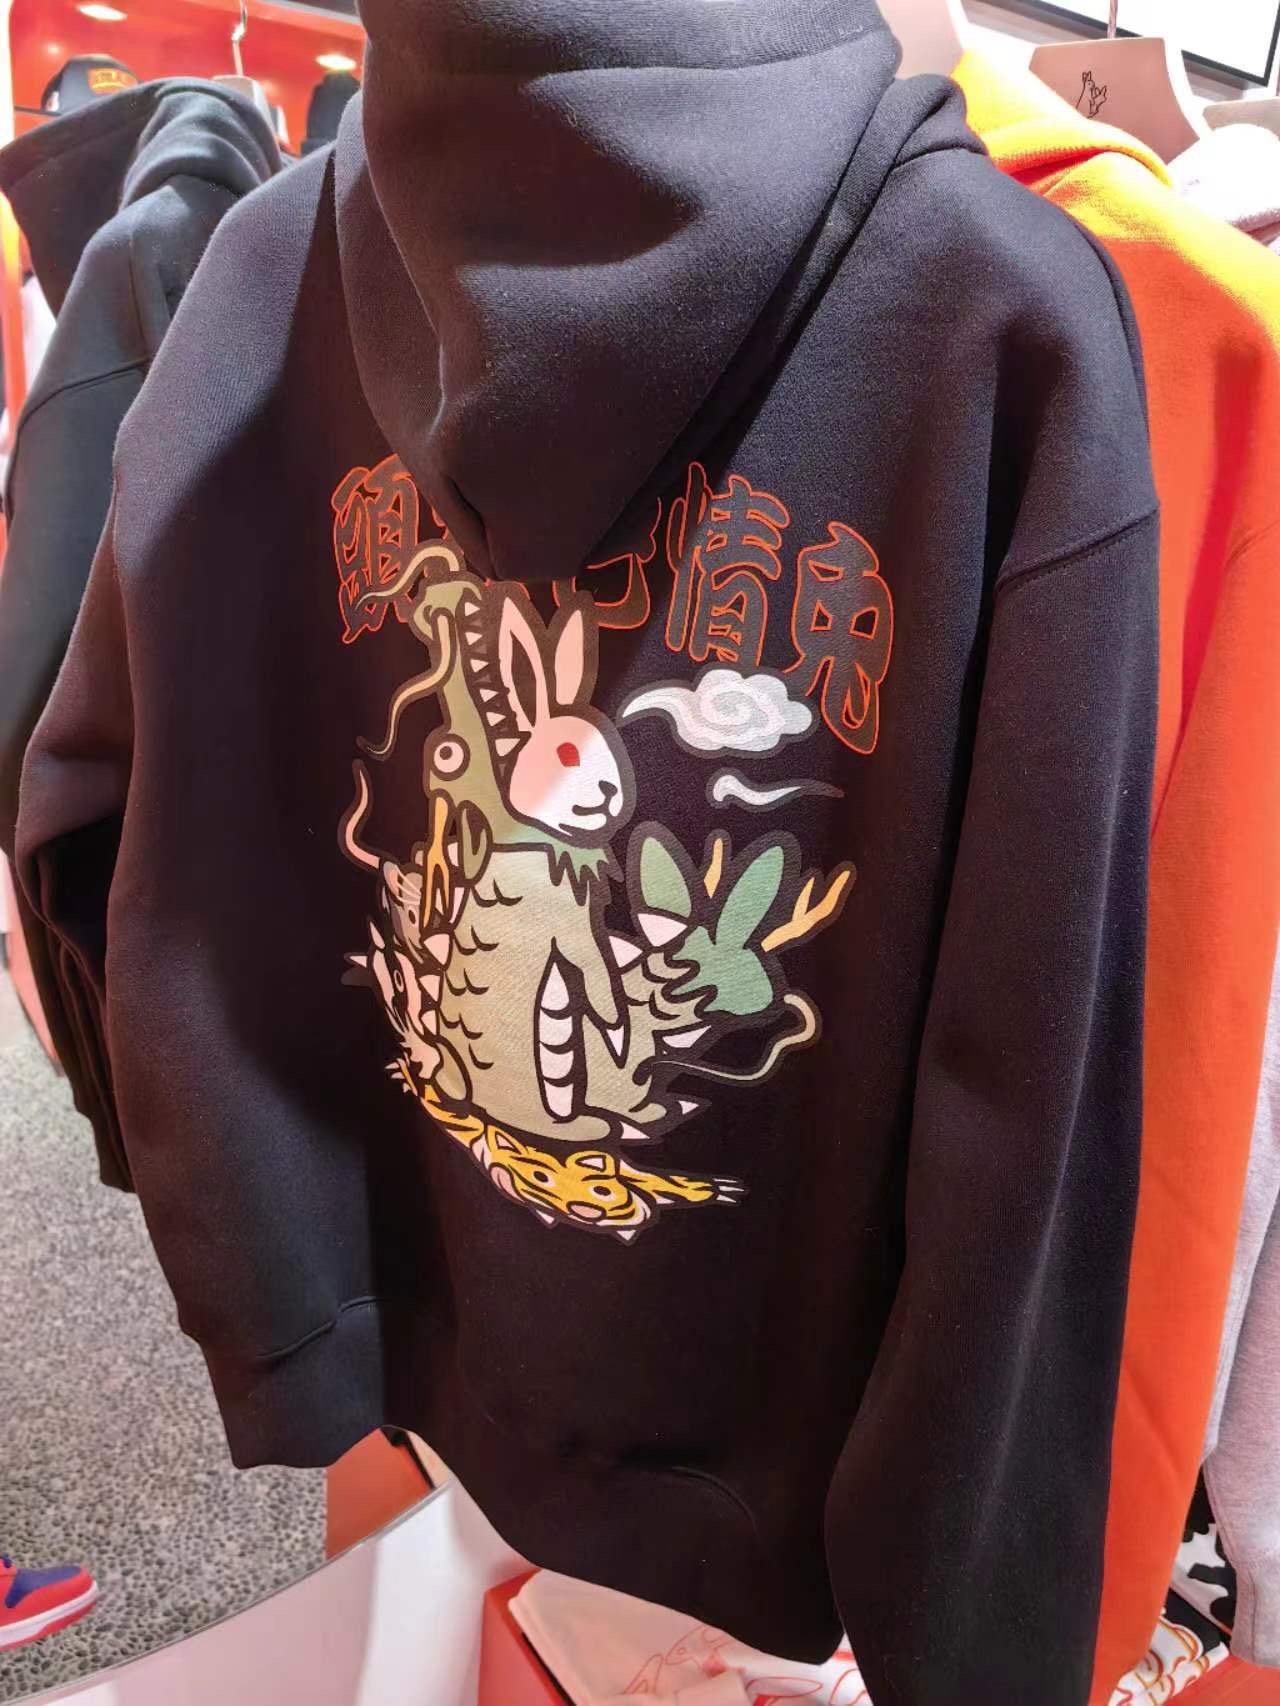 New Year 2024 Rabbits Hoodie L fr2 - トップス